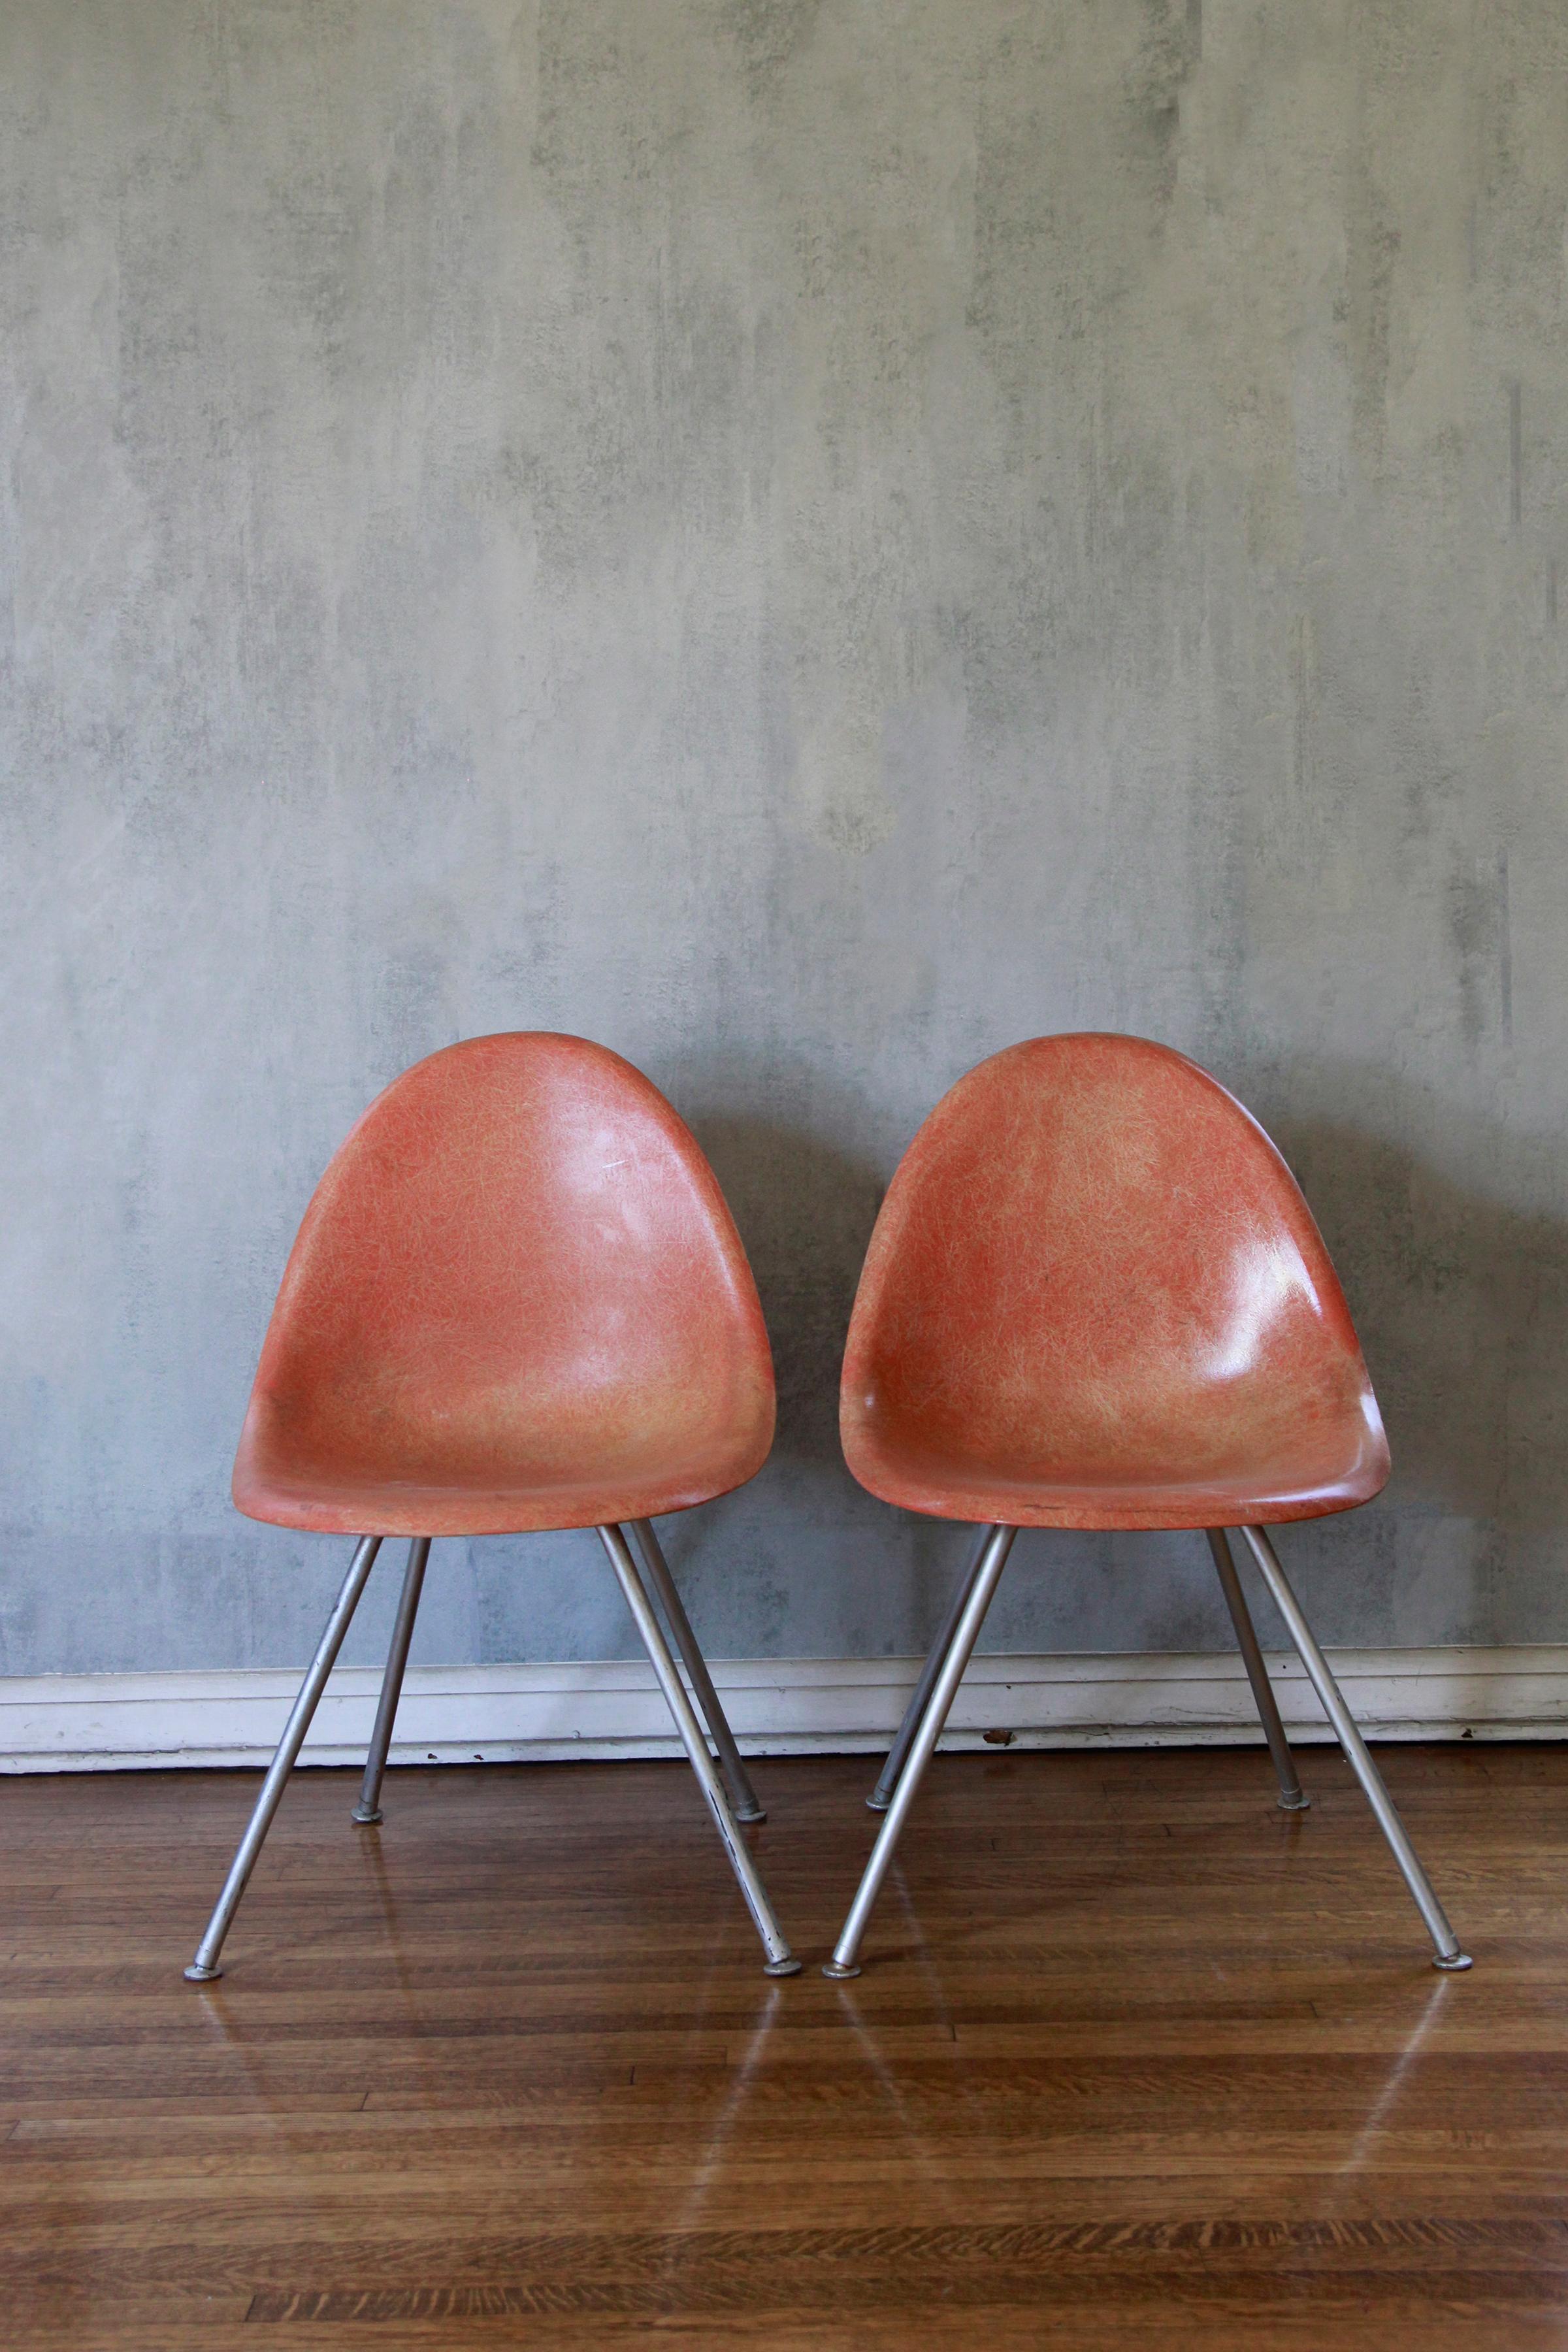 Fiberglass shell chairs circa 1960 salmon color chairs 
Iconic design with fiberglass shell on stackable steel base. 
Comfortable contoured ergonomic design. 
Embossed number on both under the chairs. 
Iconic and collectible chairs and mid century